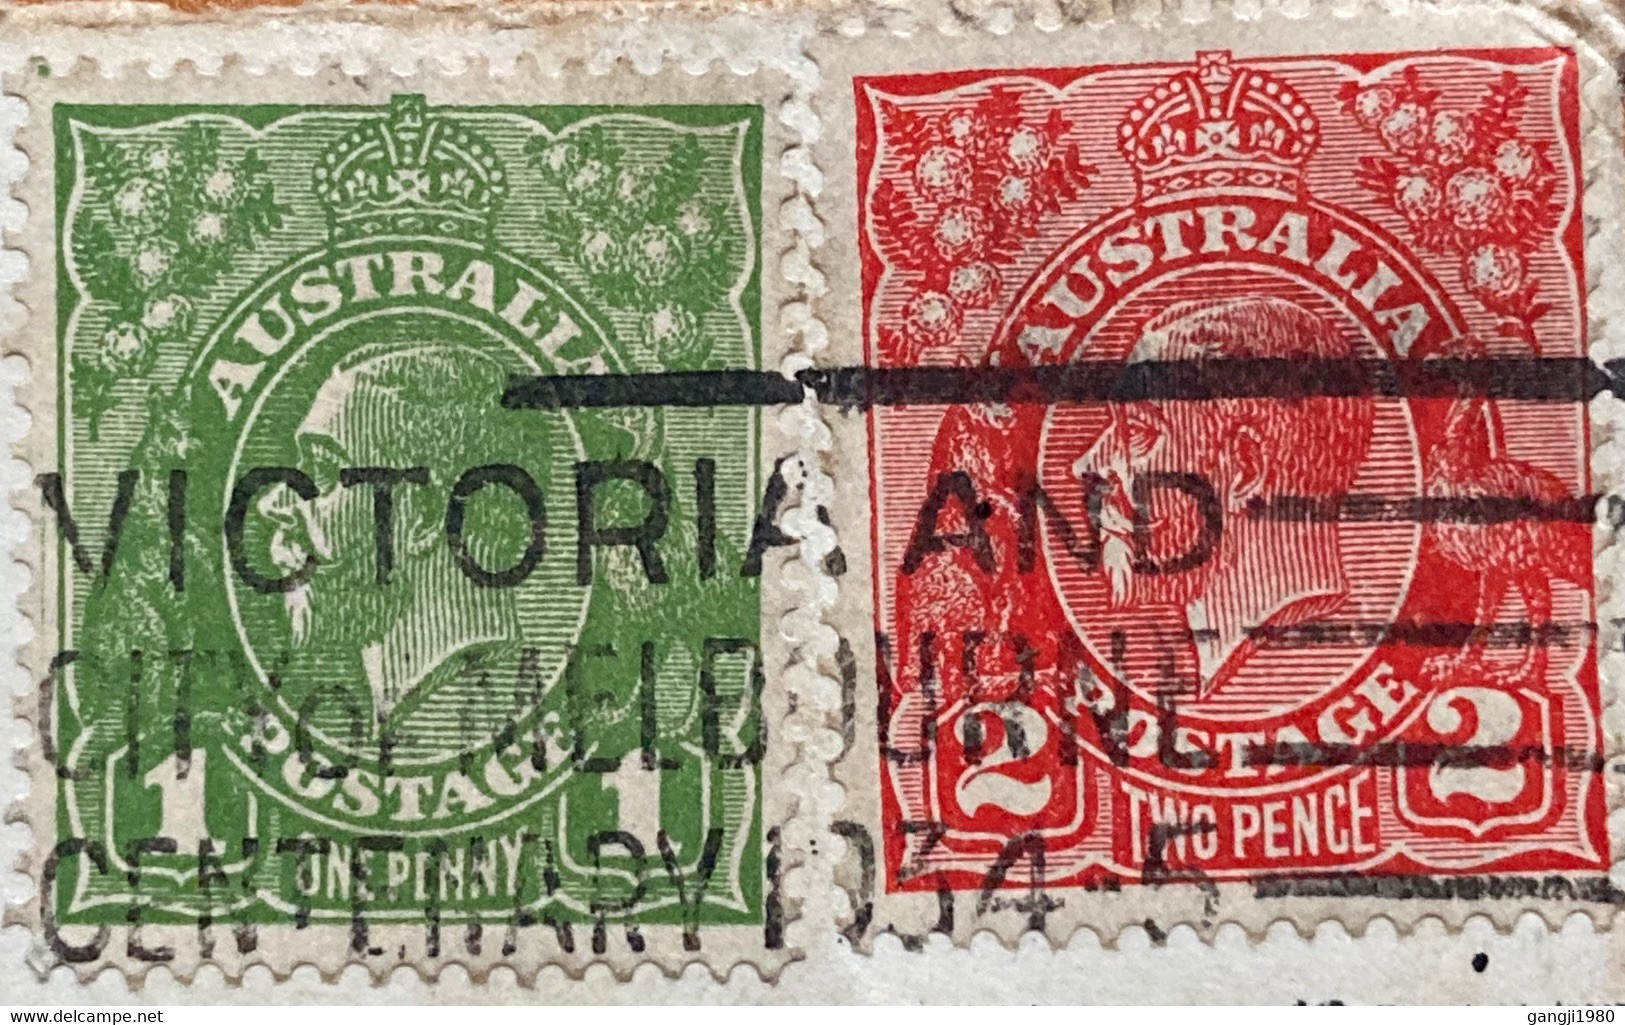 AUSTRALIA 1934, KING GEORGE 2 STAMPS,SLOGAN VICTORIA & CITY MELBOURNE CENTENARY-1934 WITH SPECIAL PREPRINTED USED COVER - Cartas & Documentos